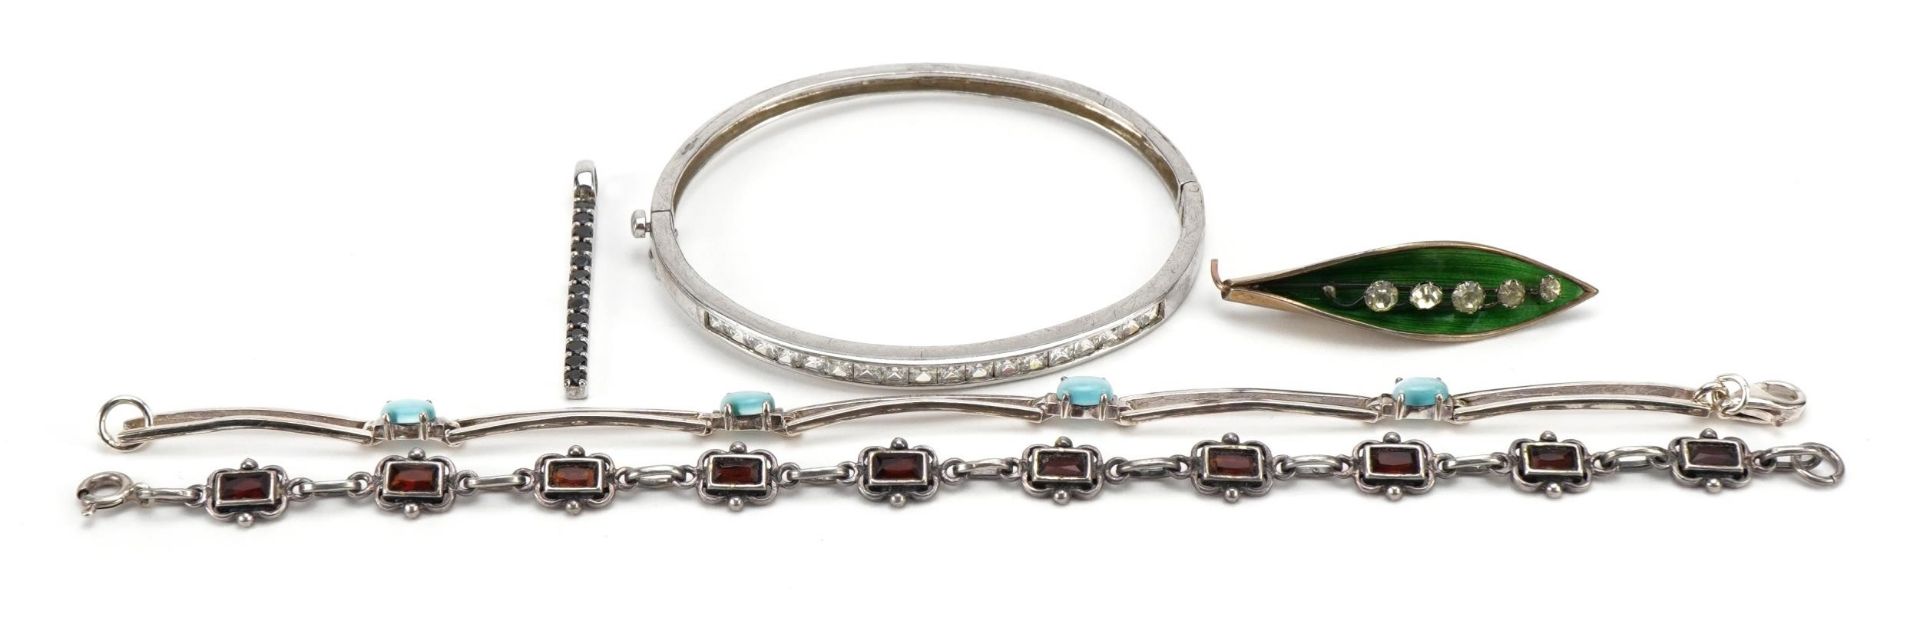 Silver jewellery comprising two gem set bracelets, hinged bangle and pendant set with black stones